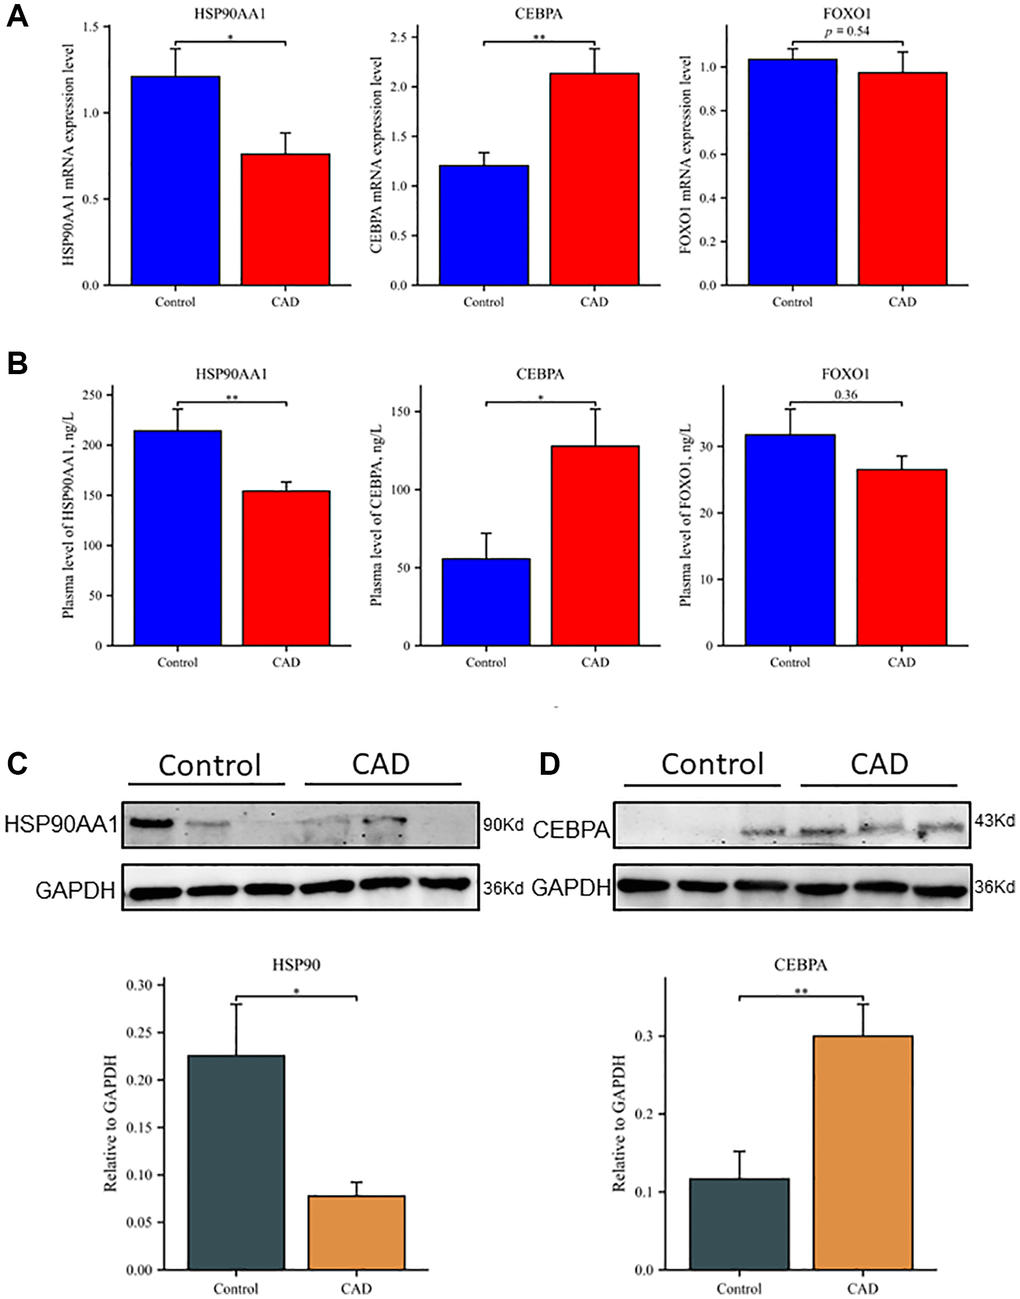 Differential expression of hub genes at transcription and translation levels in clinical samples. (A) Relative mRNA levels of HSP90AA1, CEBPA, and FOXO1 by RT-qPCR analysis in whole blood among controls (n = 50) and patients with CAD (n = 50). (B) Plasma expression levels of HSP90AA1, CEBPA, and FOXO1 in controls and patients with CAD. (C) Western blot analyses of HSP90AA1 protein levels in PBMCs, including representative blot images and a densitometric summary of the blot analysis after normalization to GAPDH. (D) Western blot analyses of CEBPA protein levels in PBMCs, including representative blot images and a densitometric summary of the blot analysis after normalization to GAPDH. *P **P 